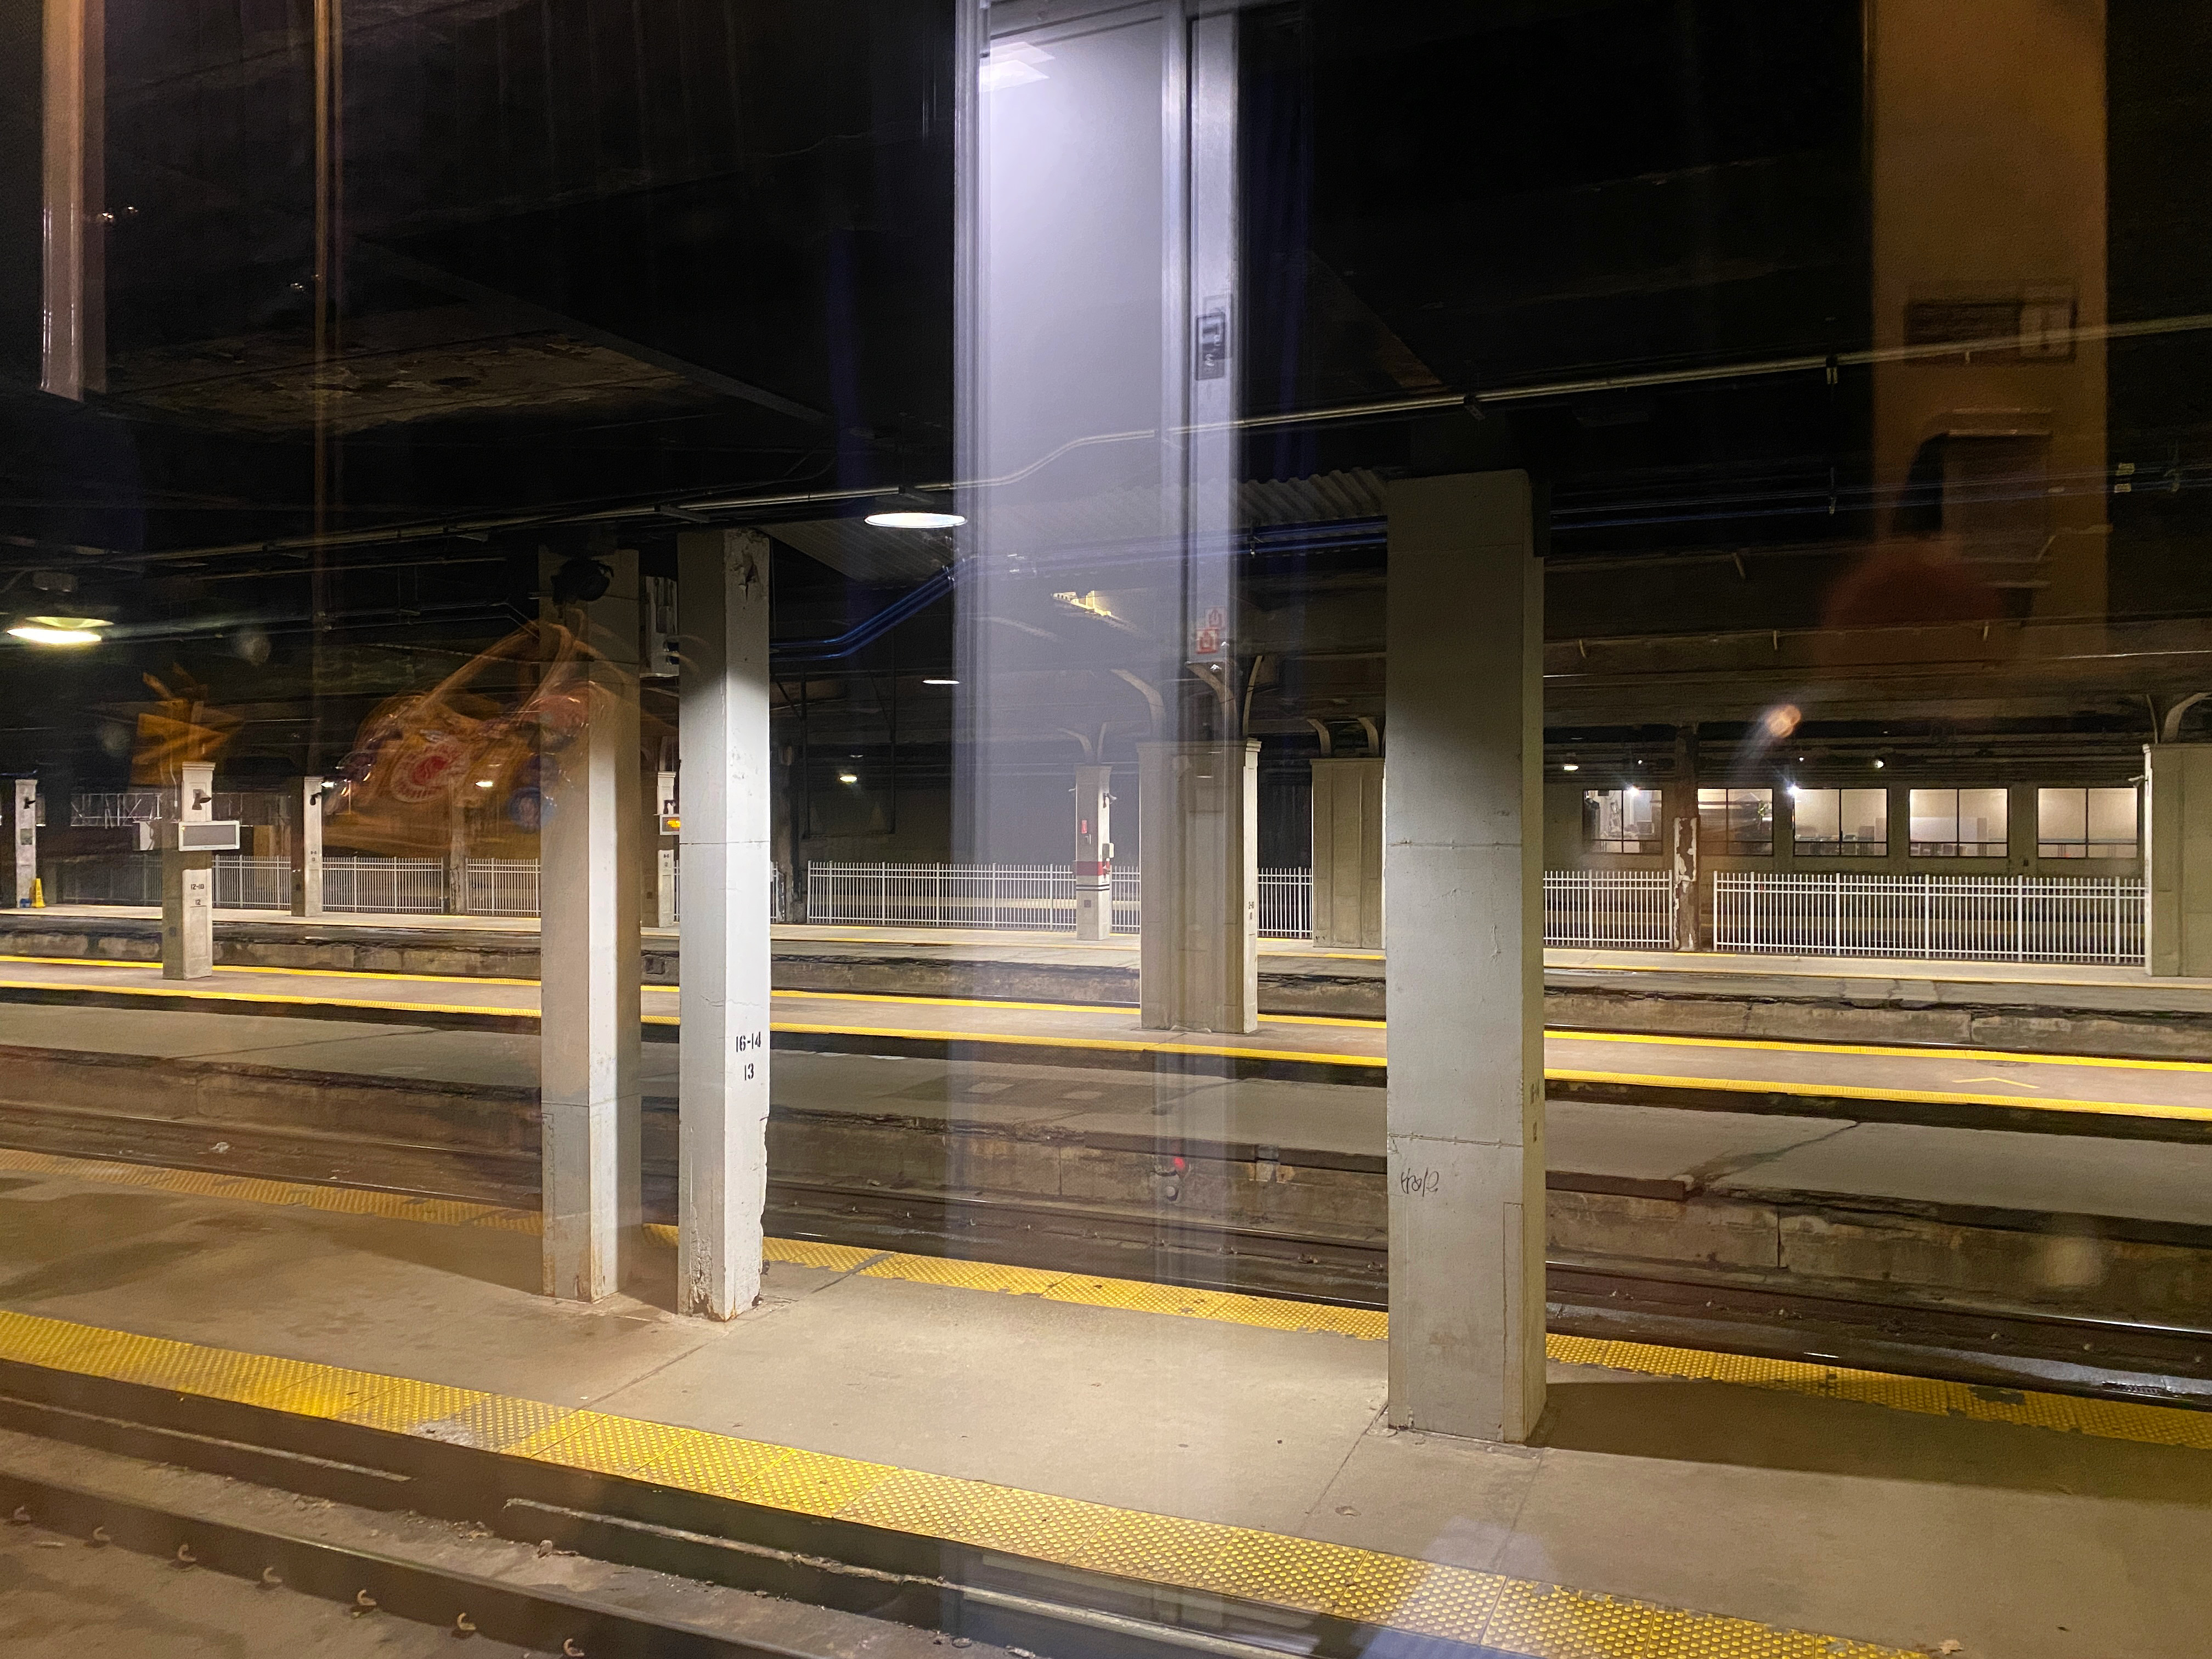 Ghostly image of the empty train station and the reflection of the inside of the train car in the window